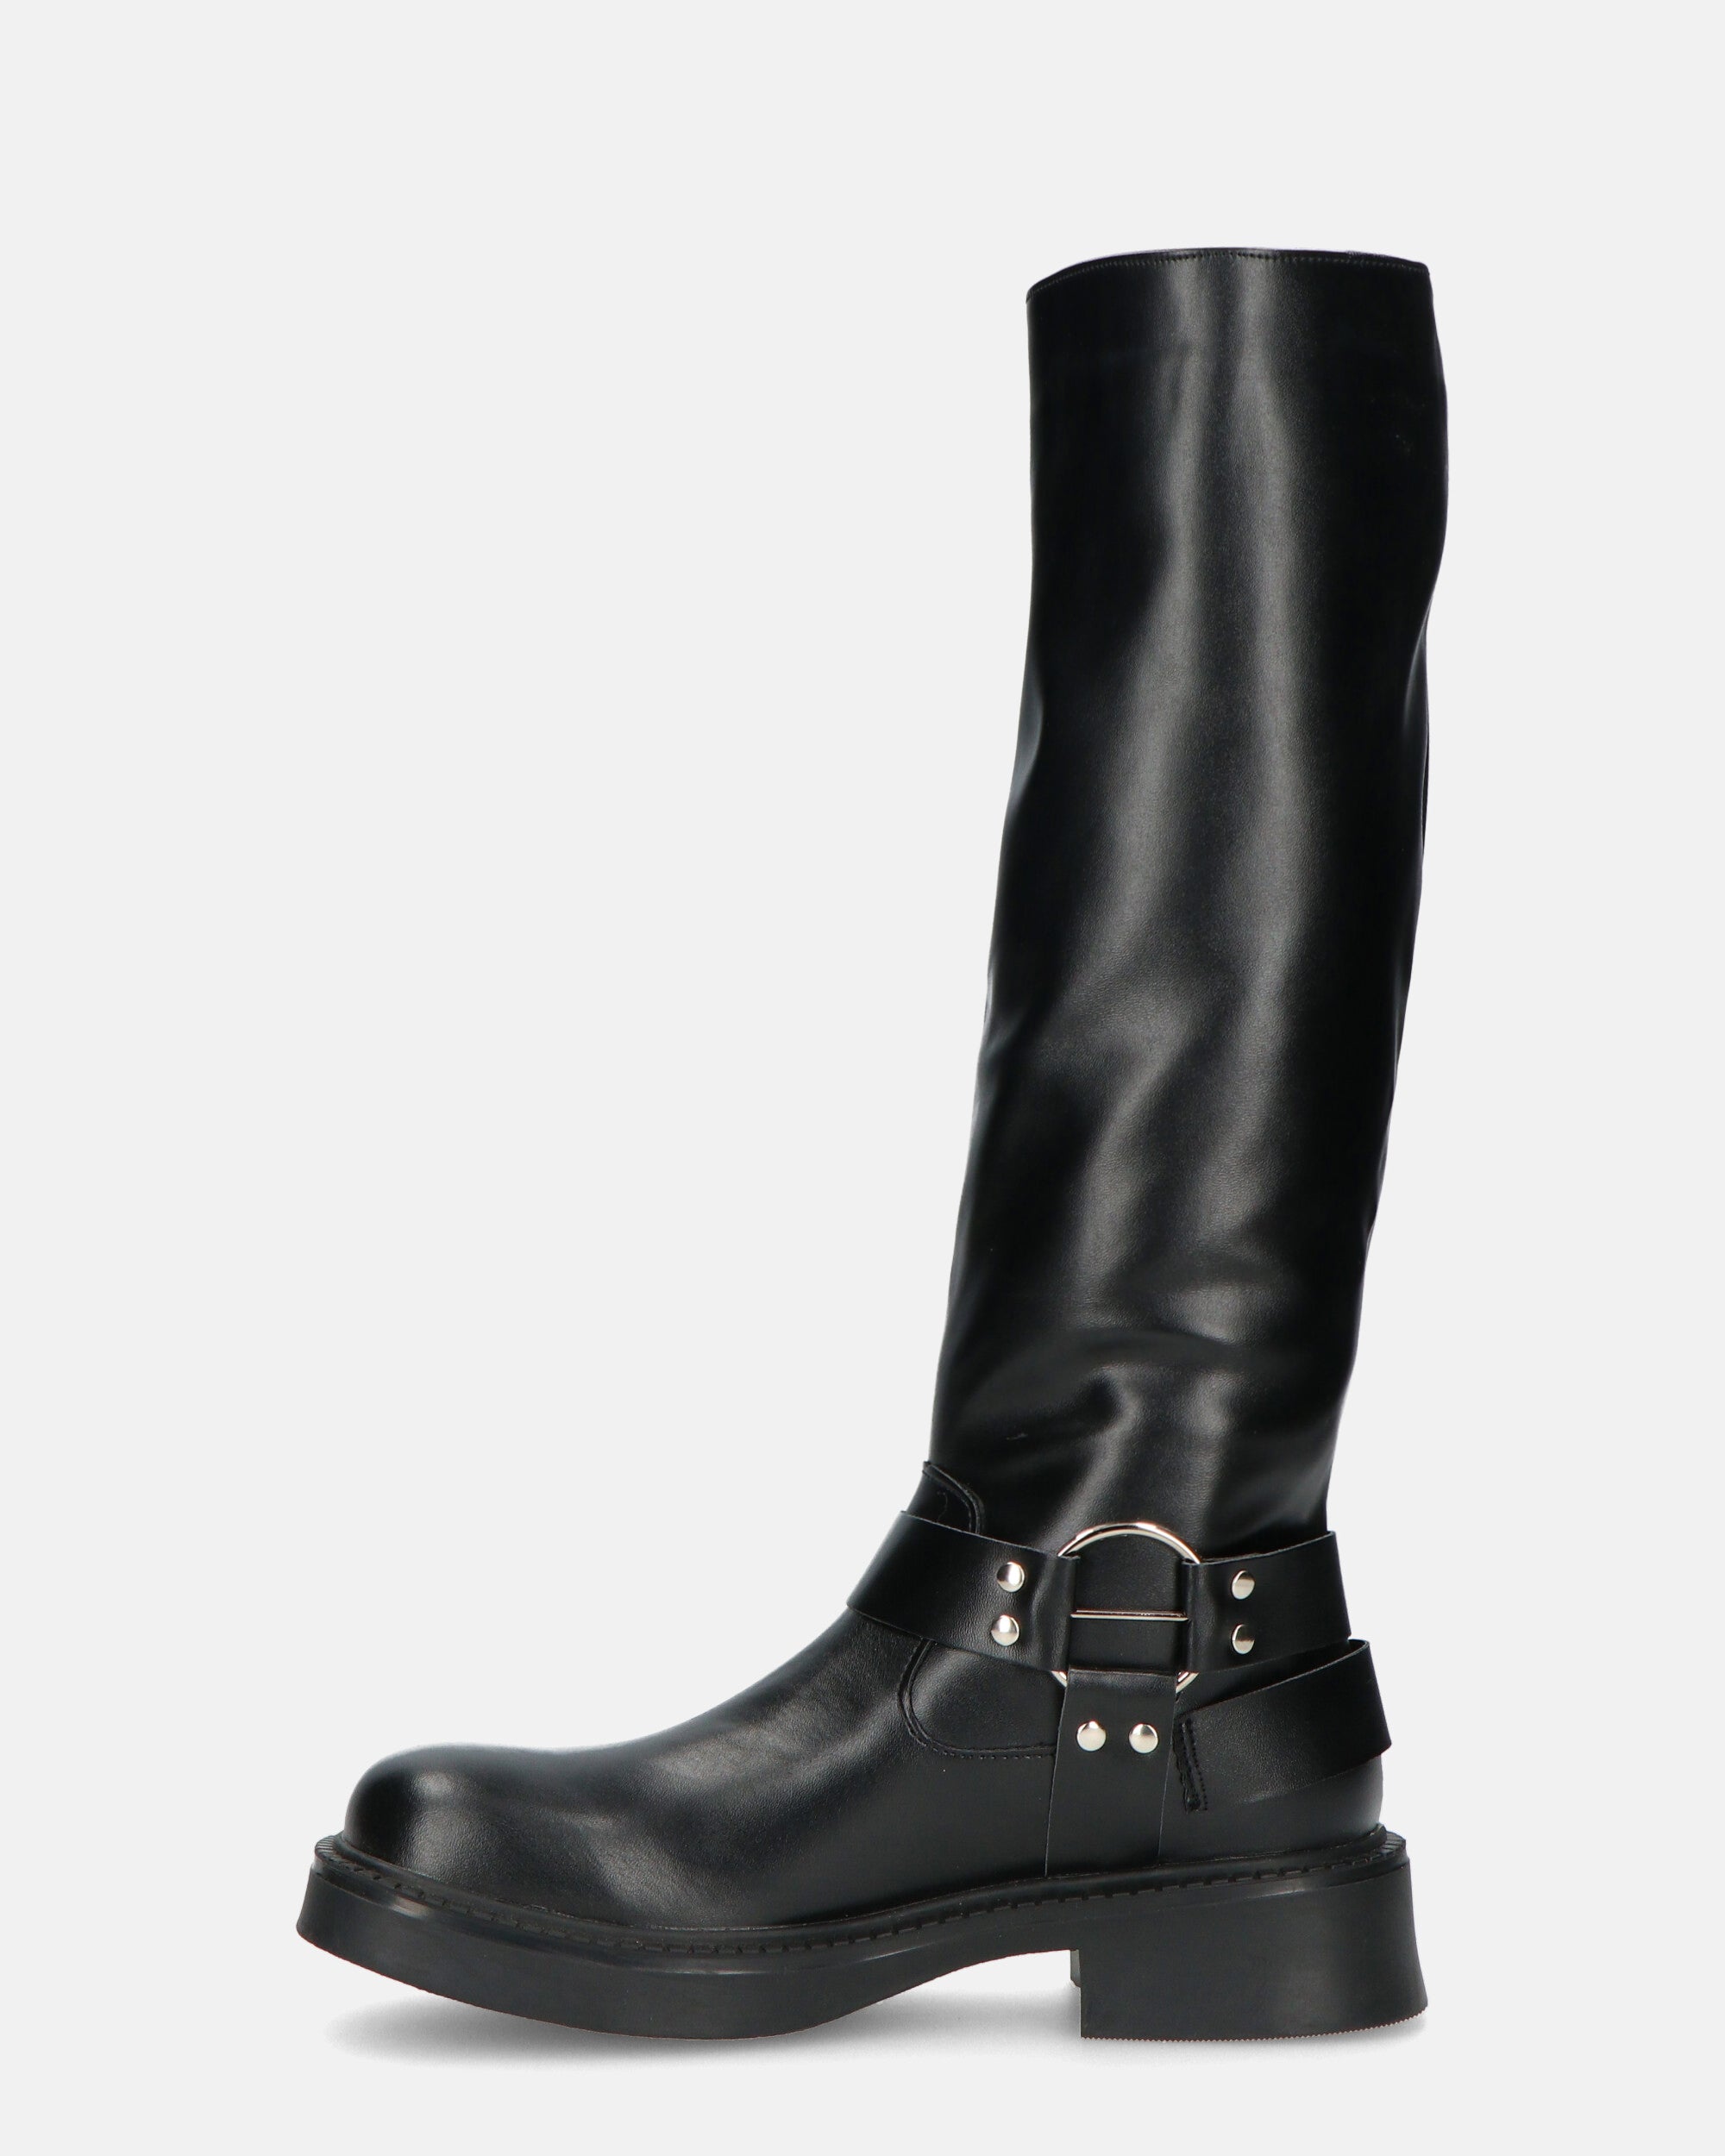 HISA - black high boots with various straps and buckles